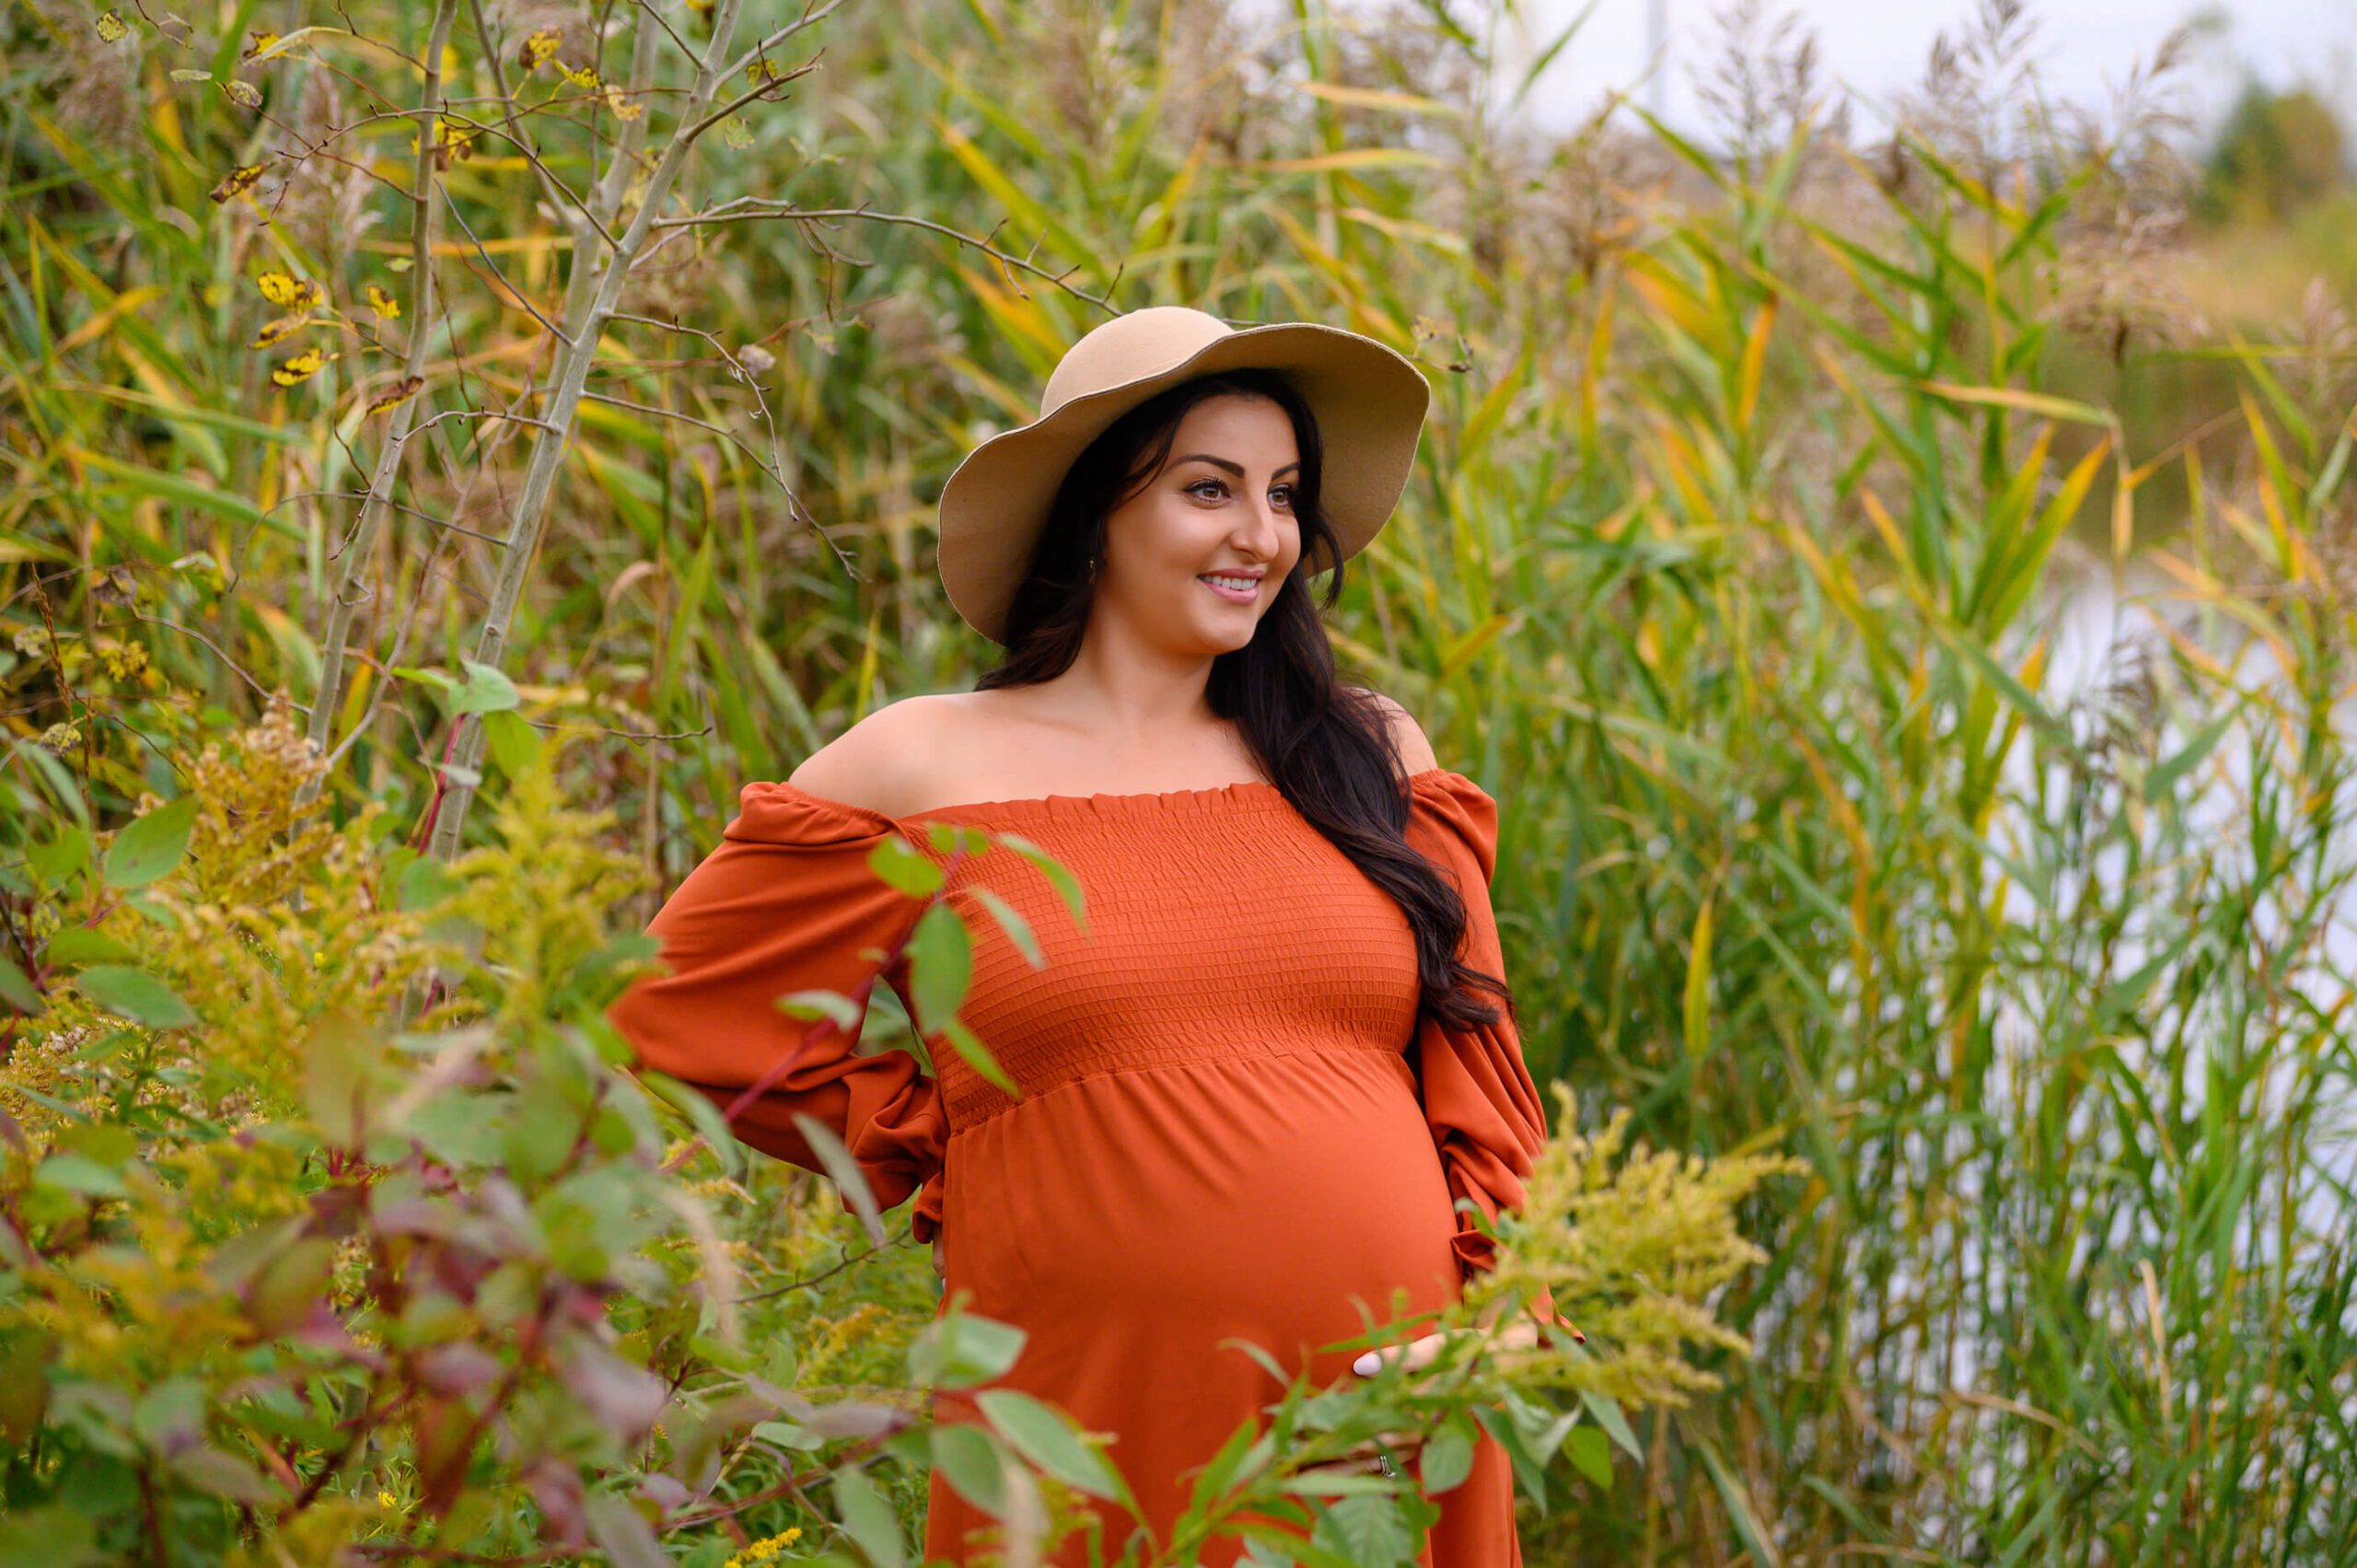 outdoor maternity photography session wearing an orange dress wearing a hat